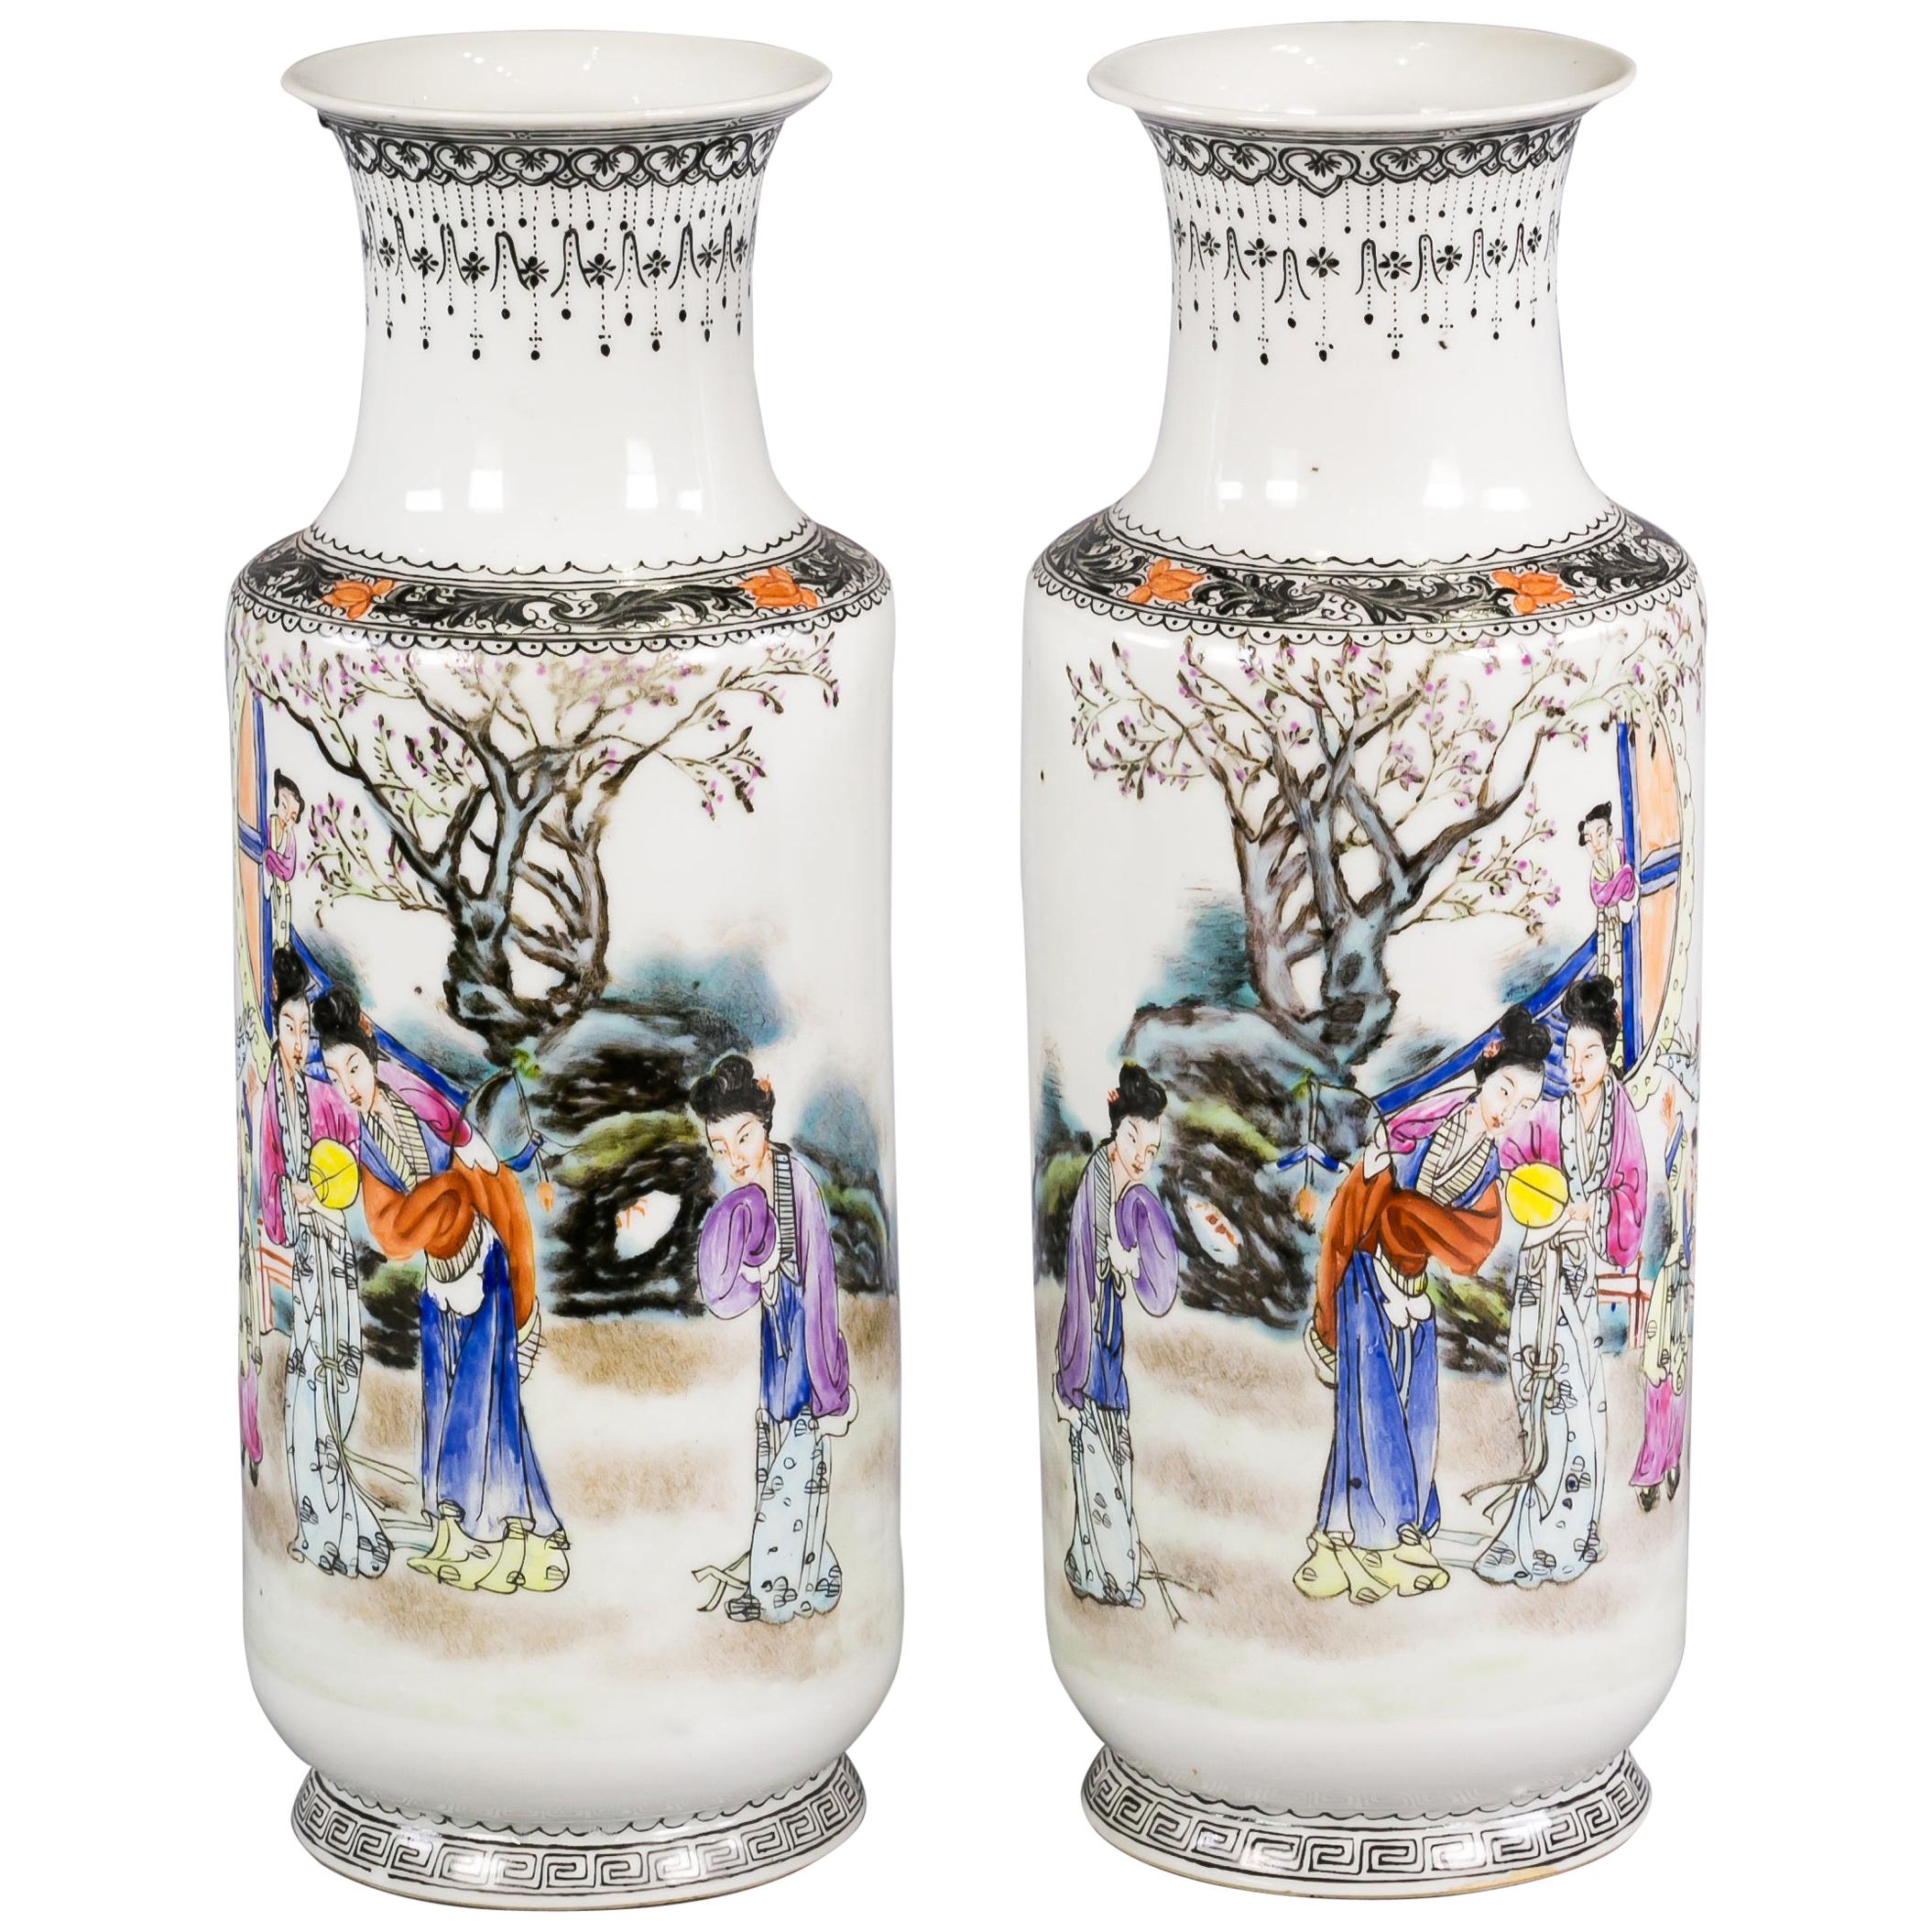 Pair of Chinese Porcelain Polychrome Vases, circa 1900